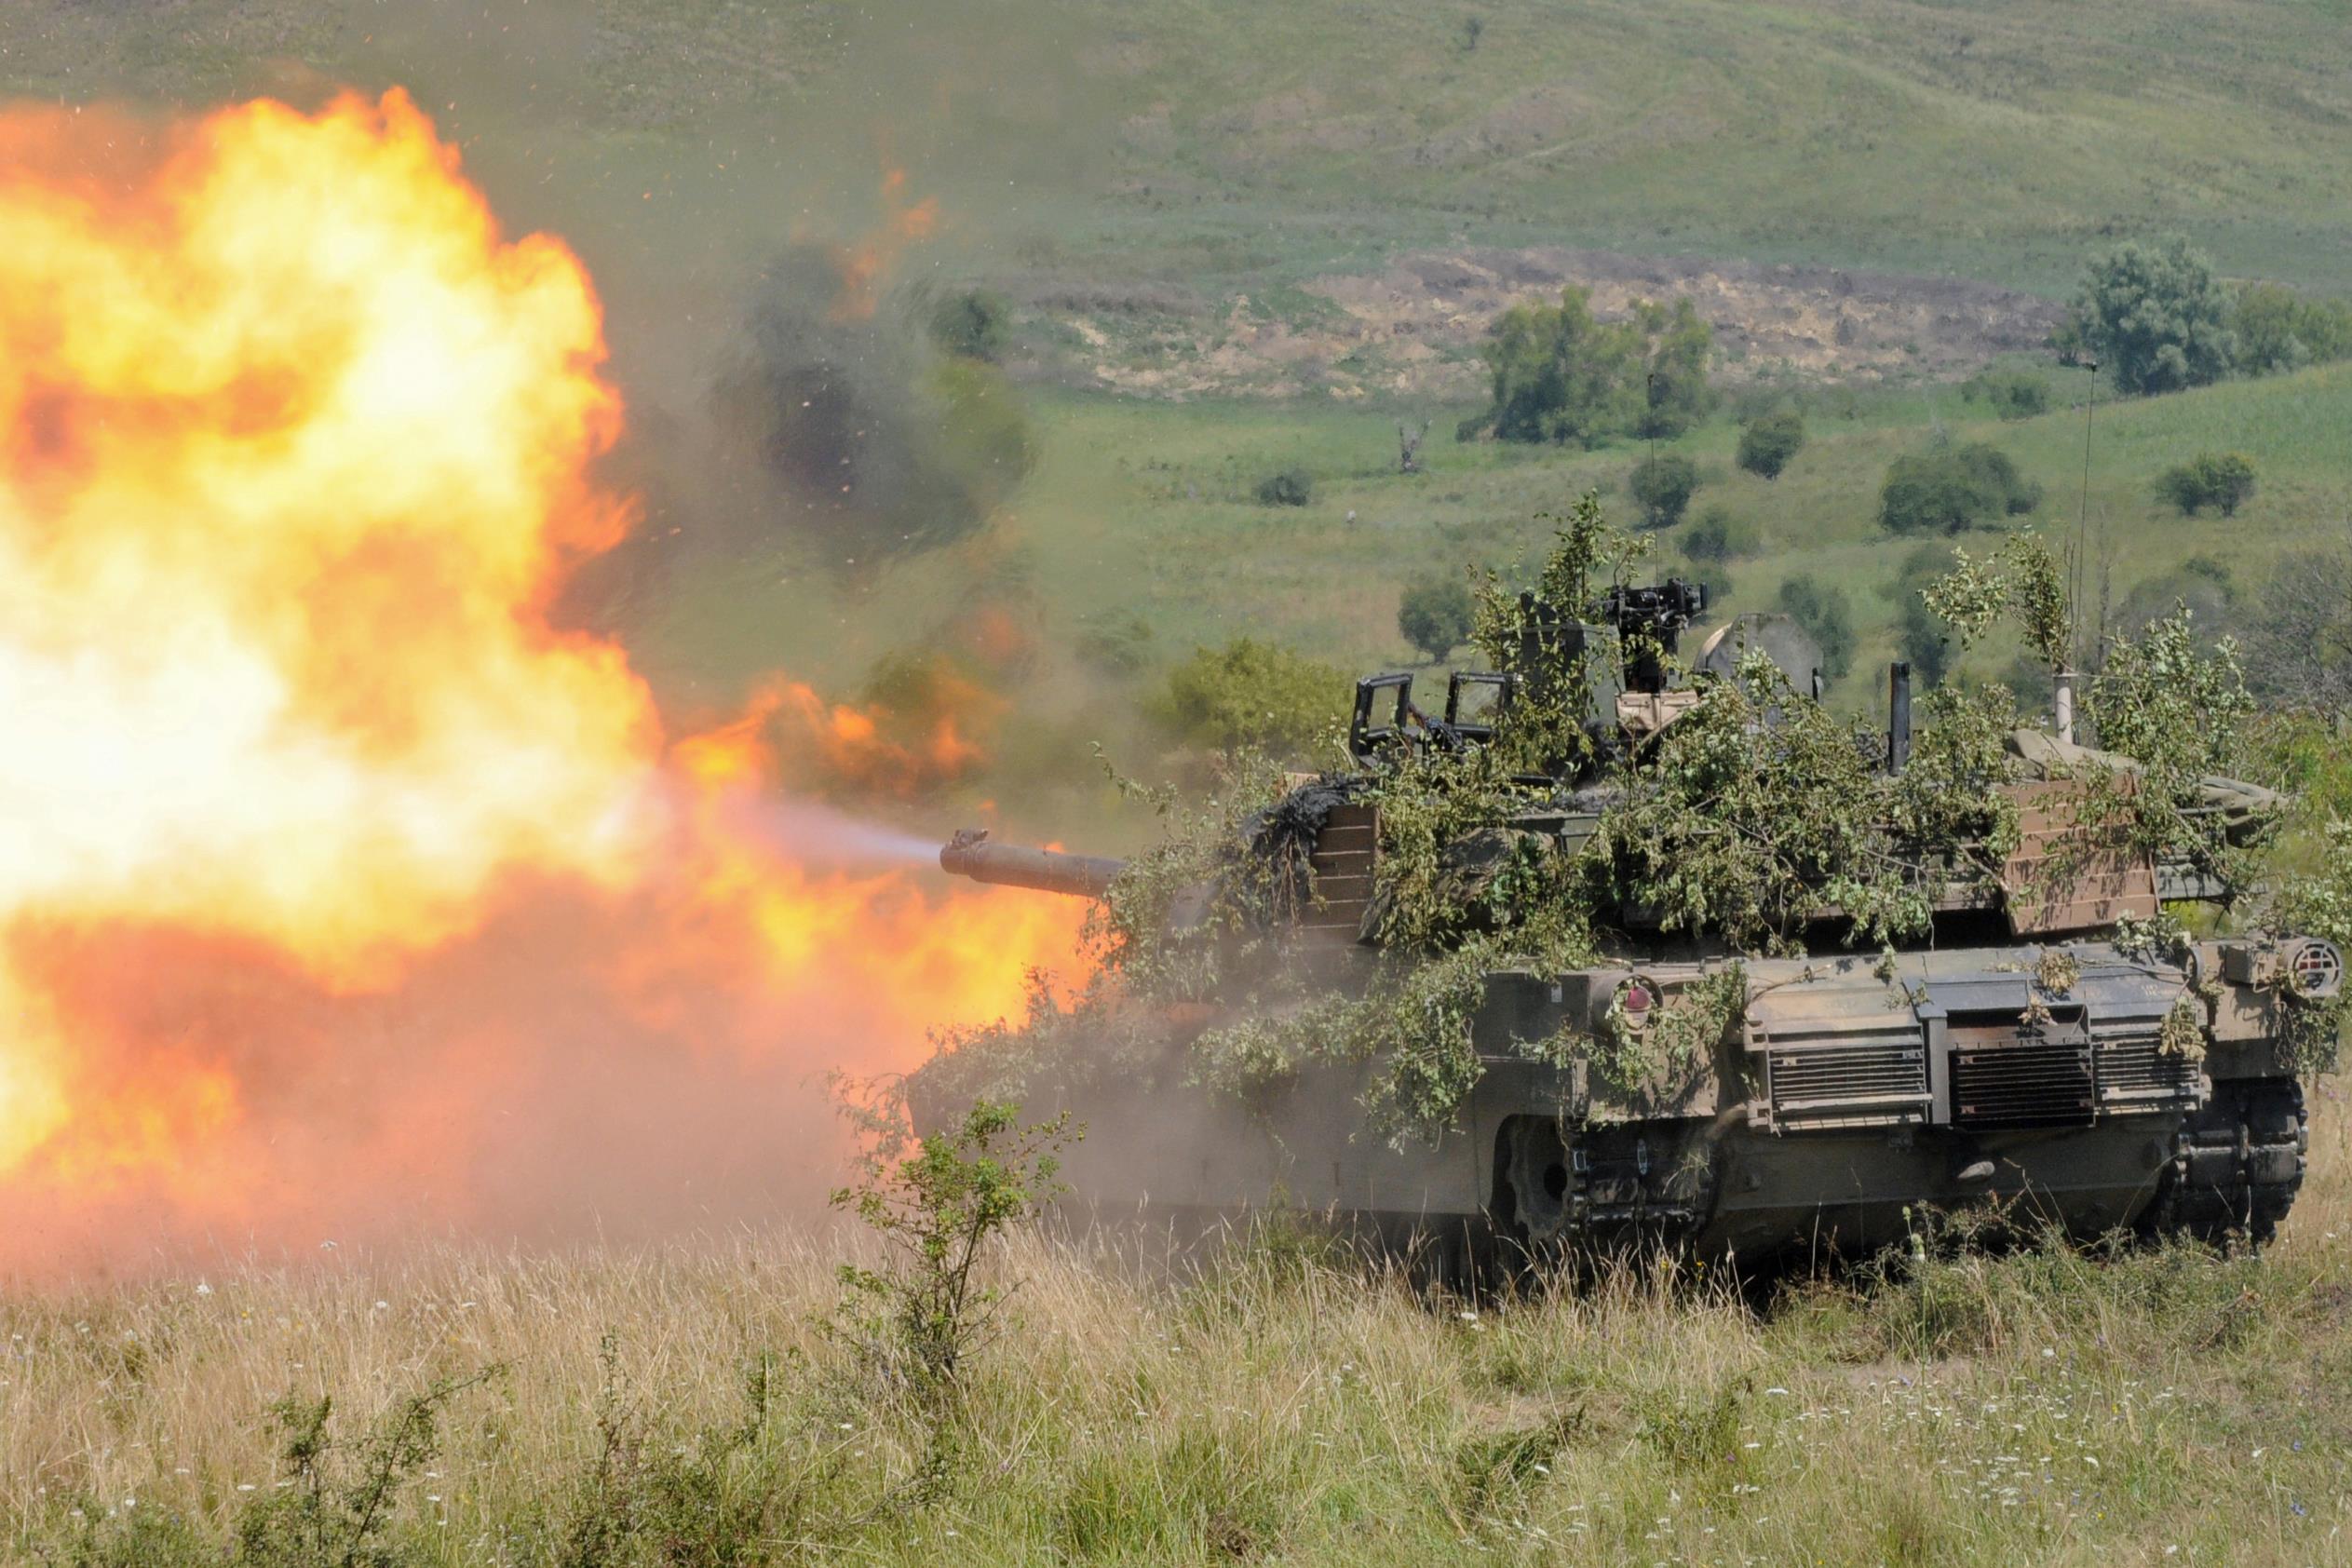 U.S. European Command virtually joined service members around the world conducting a global command-and-control exercise, Austere Challenge 2017, focused on European security. Pictured here, an Abrams tank fires a round during the multinational exercise Saber Guardian 16 near Cincu, Romania, Aug. 6, 2016. The tank belongs to Delta Company, 1st Combined Arms Battalion, 64th Armor Regiment, 1st Armored Brigade Combat Team, 3rd Infantry Division. Approximately 2,800 military personnel from 10 nations took part in Saber Guardian. Army photo by Staff Sgt. Corinna Baltos. -